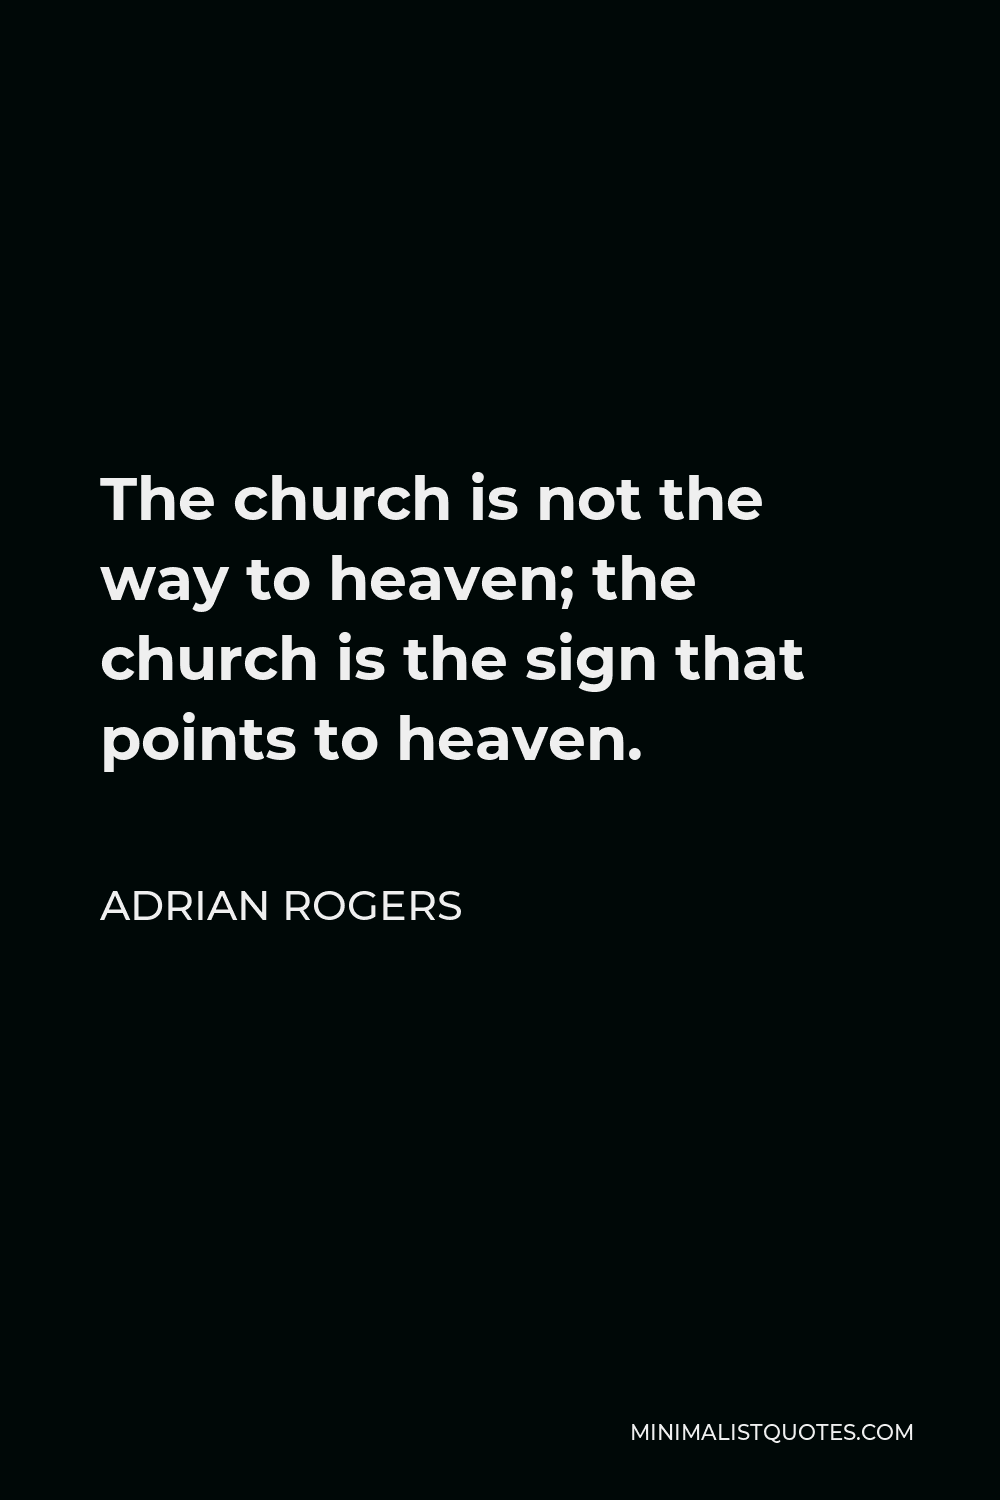 Adrian Rogers Quote - The church is not the way to heaven; the church is the sign that points to heaven.